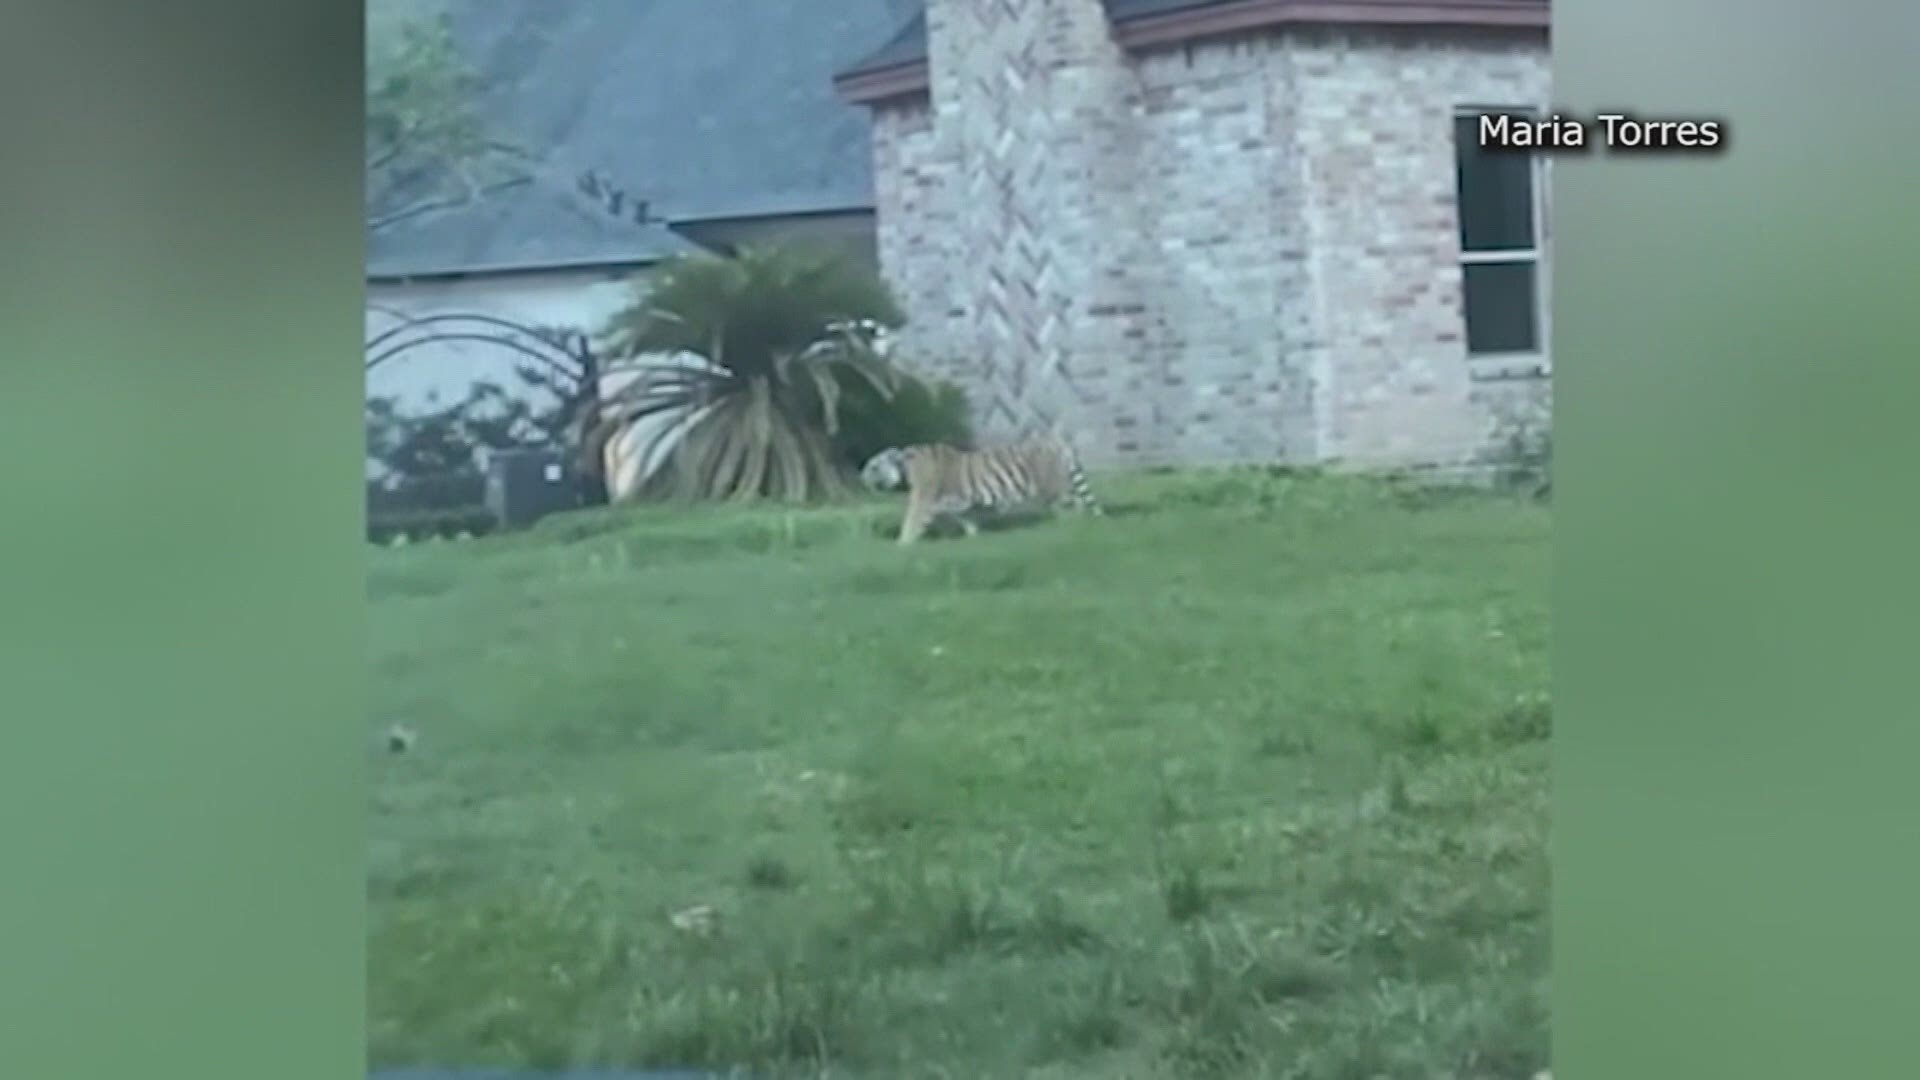 Angela Culver with Insync Exotics in Wylie told WFAA that Sunday's incident underscores the need to outlaw private ownership of big cats like tigers.